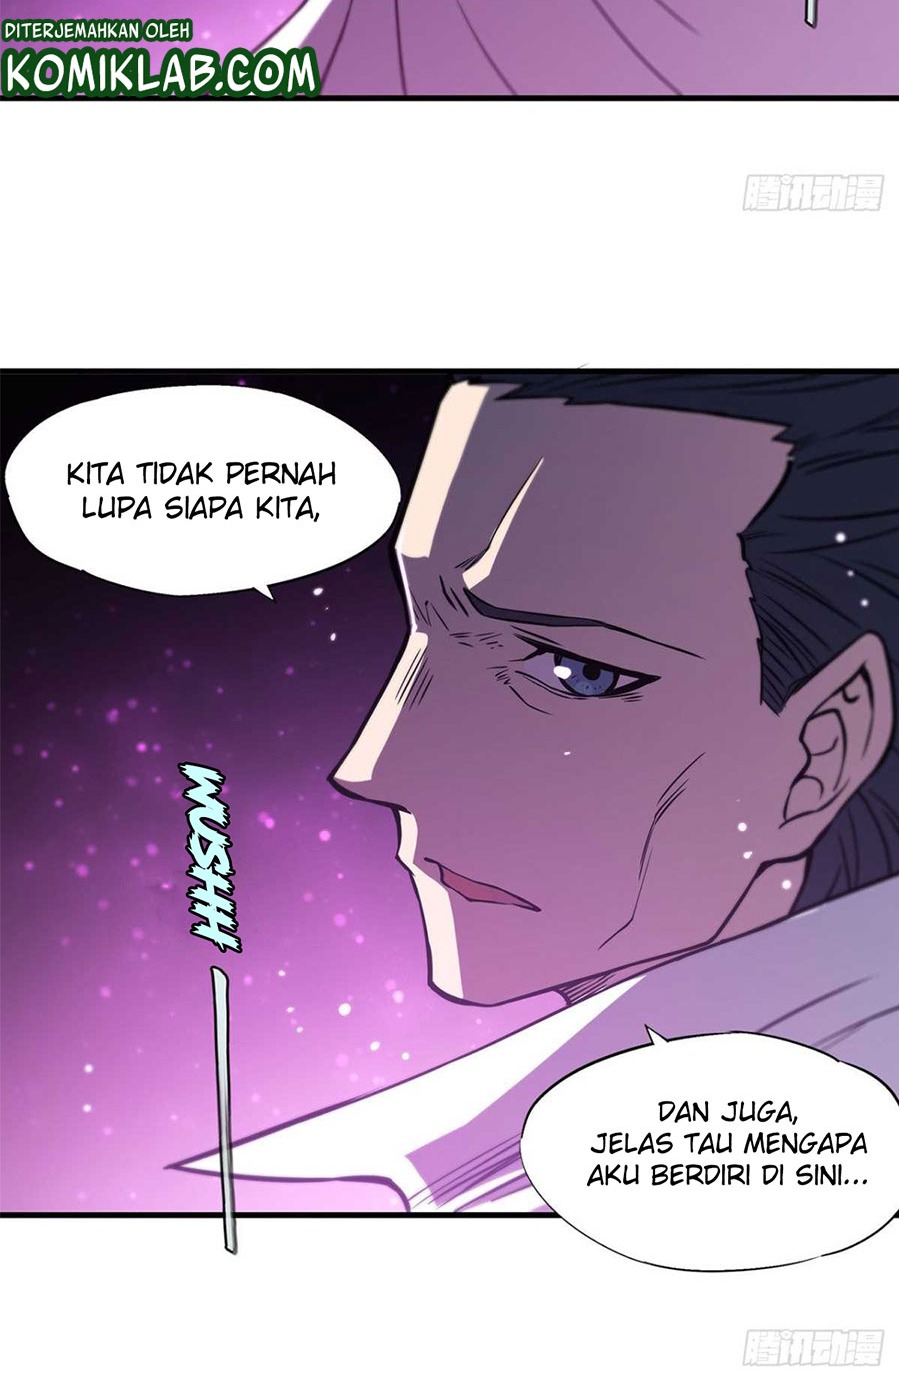 The Blood Princess and the Knight Chapter 154